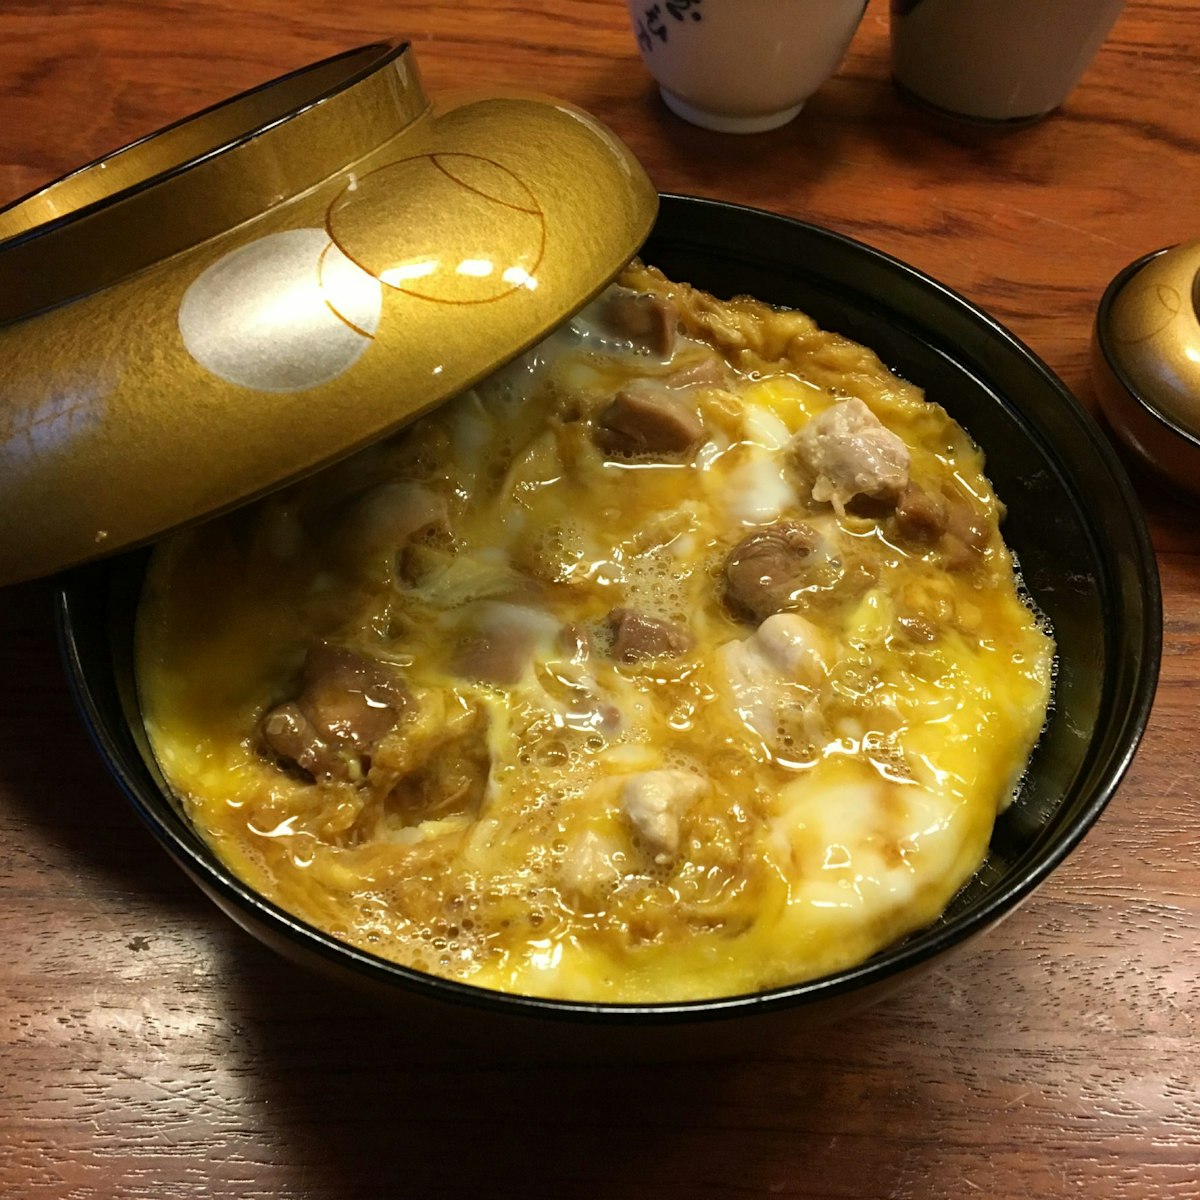 Tamahide's famous oyakodon (chicken and omelette on rice), served in a laquer bowl, Marunouchi & Nihombashi.